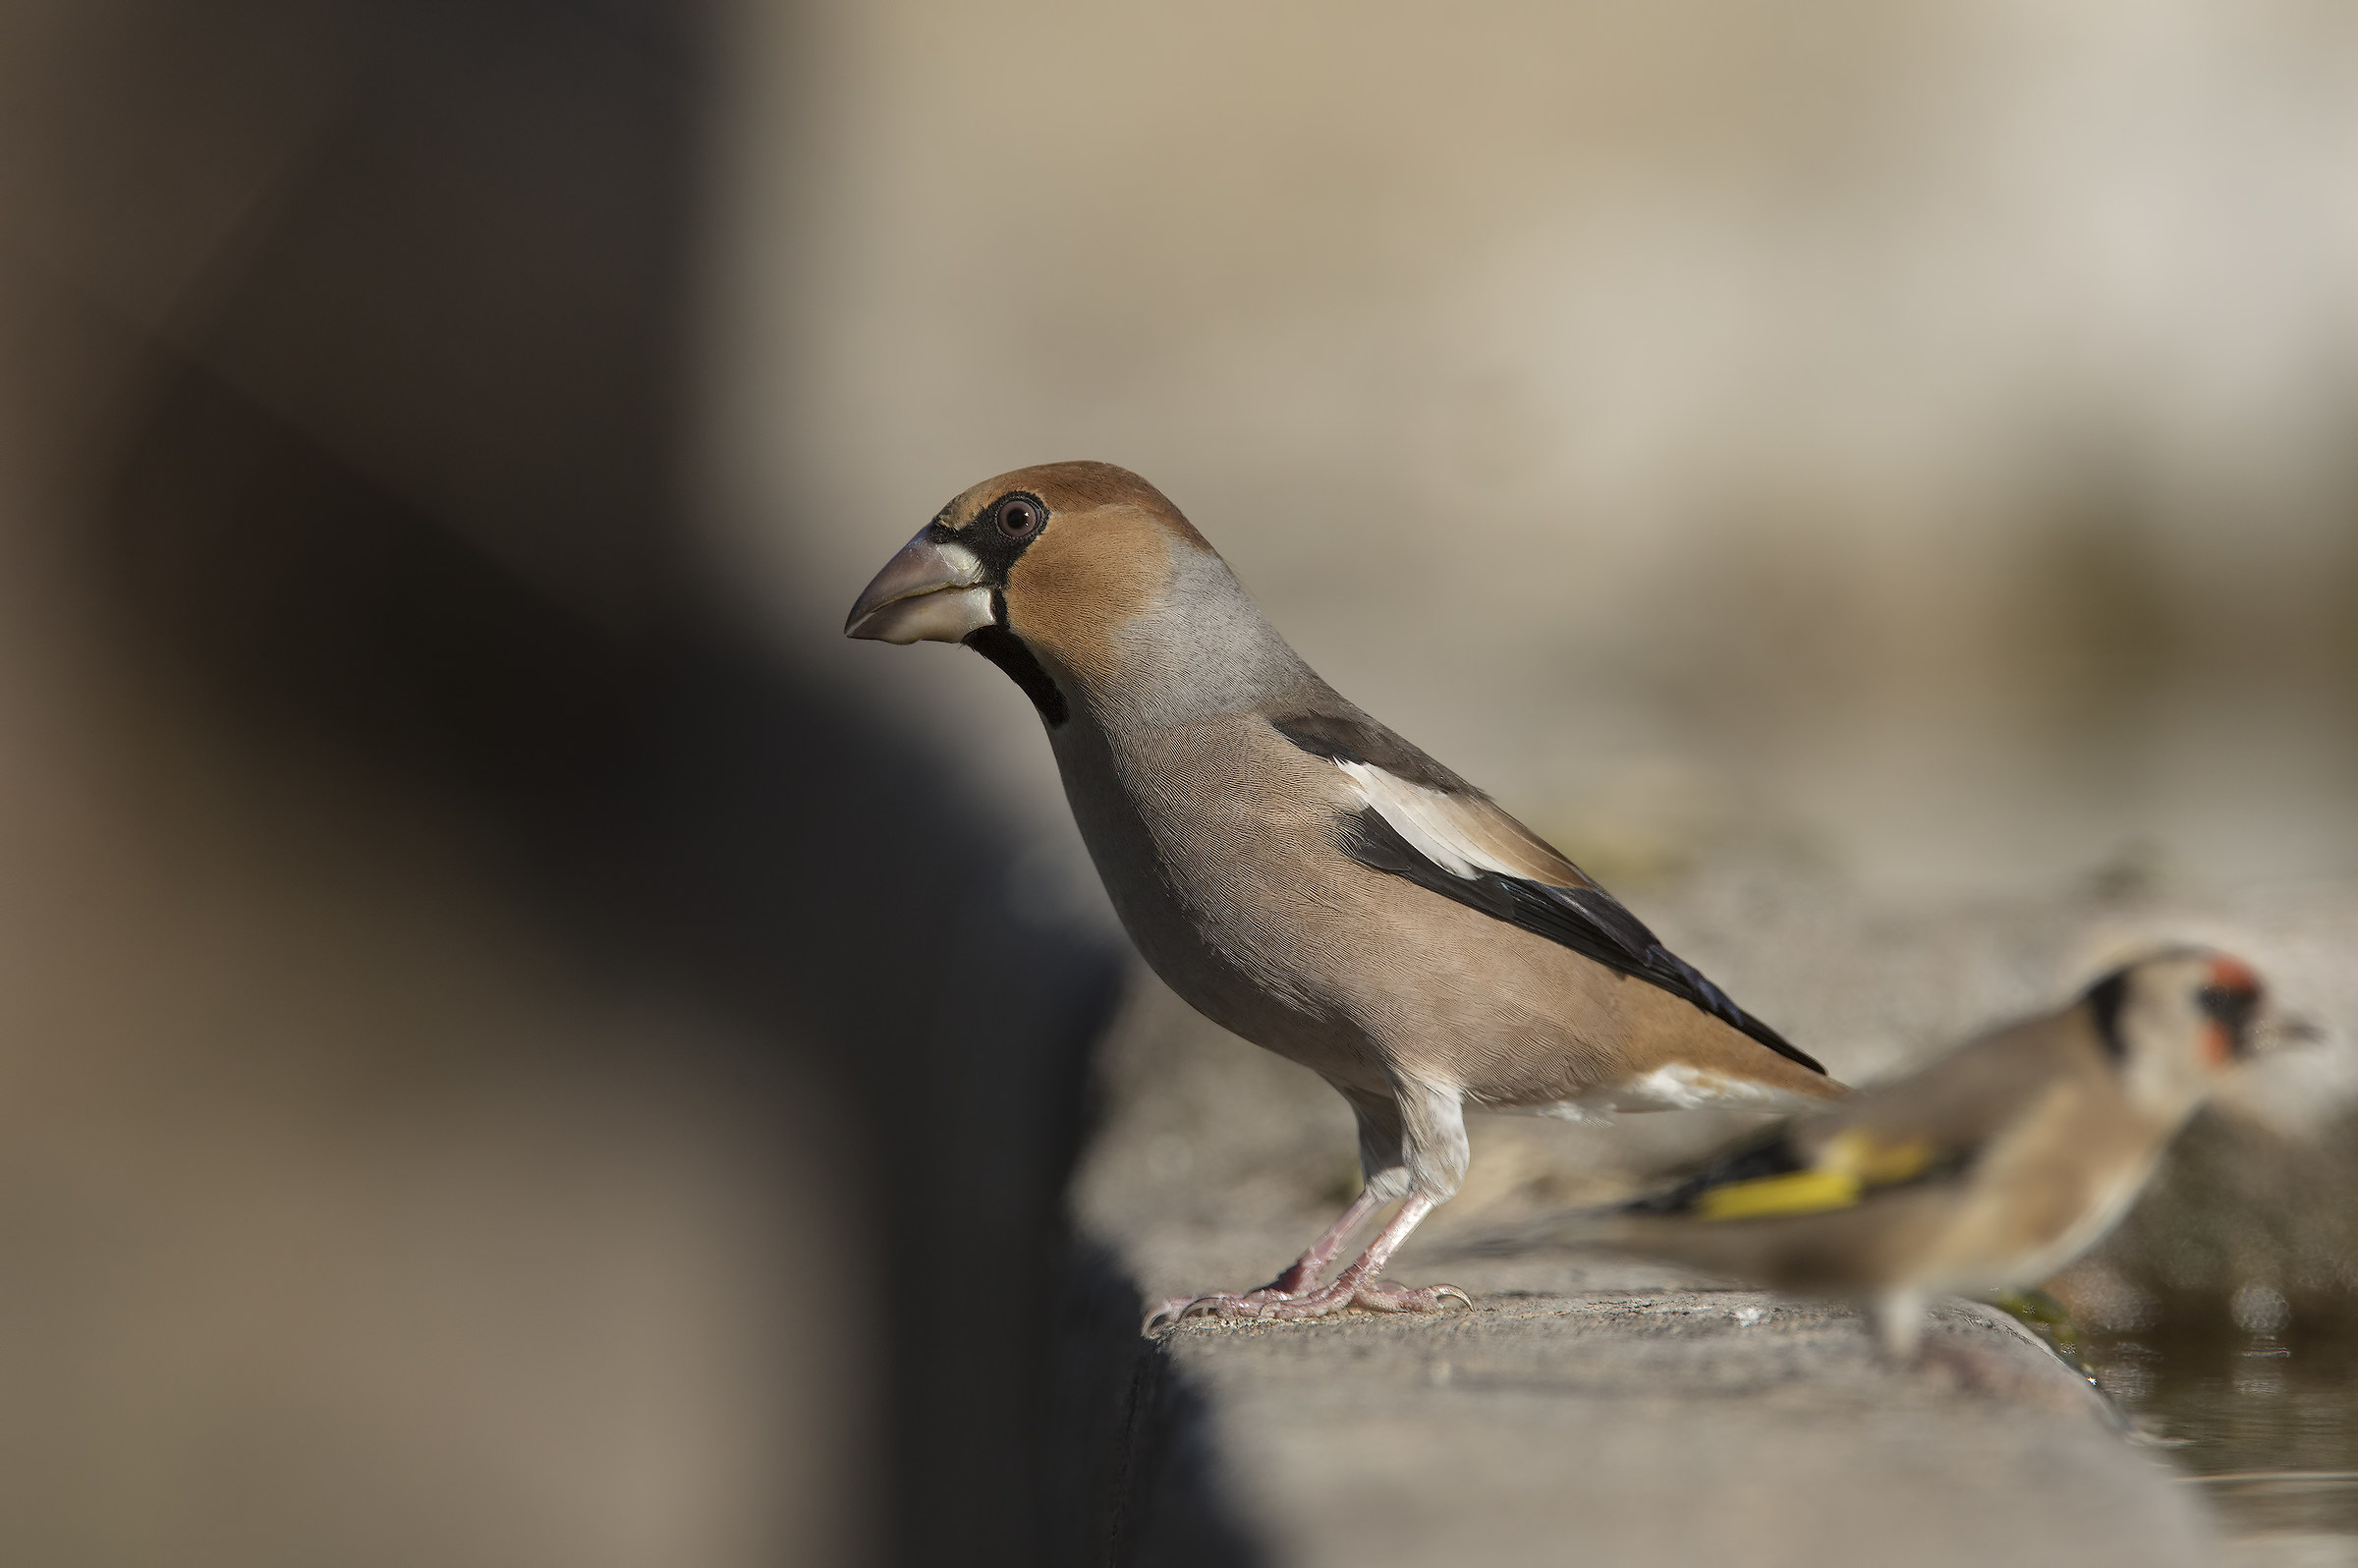 Hawfinch (coccothraustes coccothraustes)...